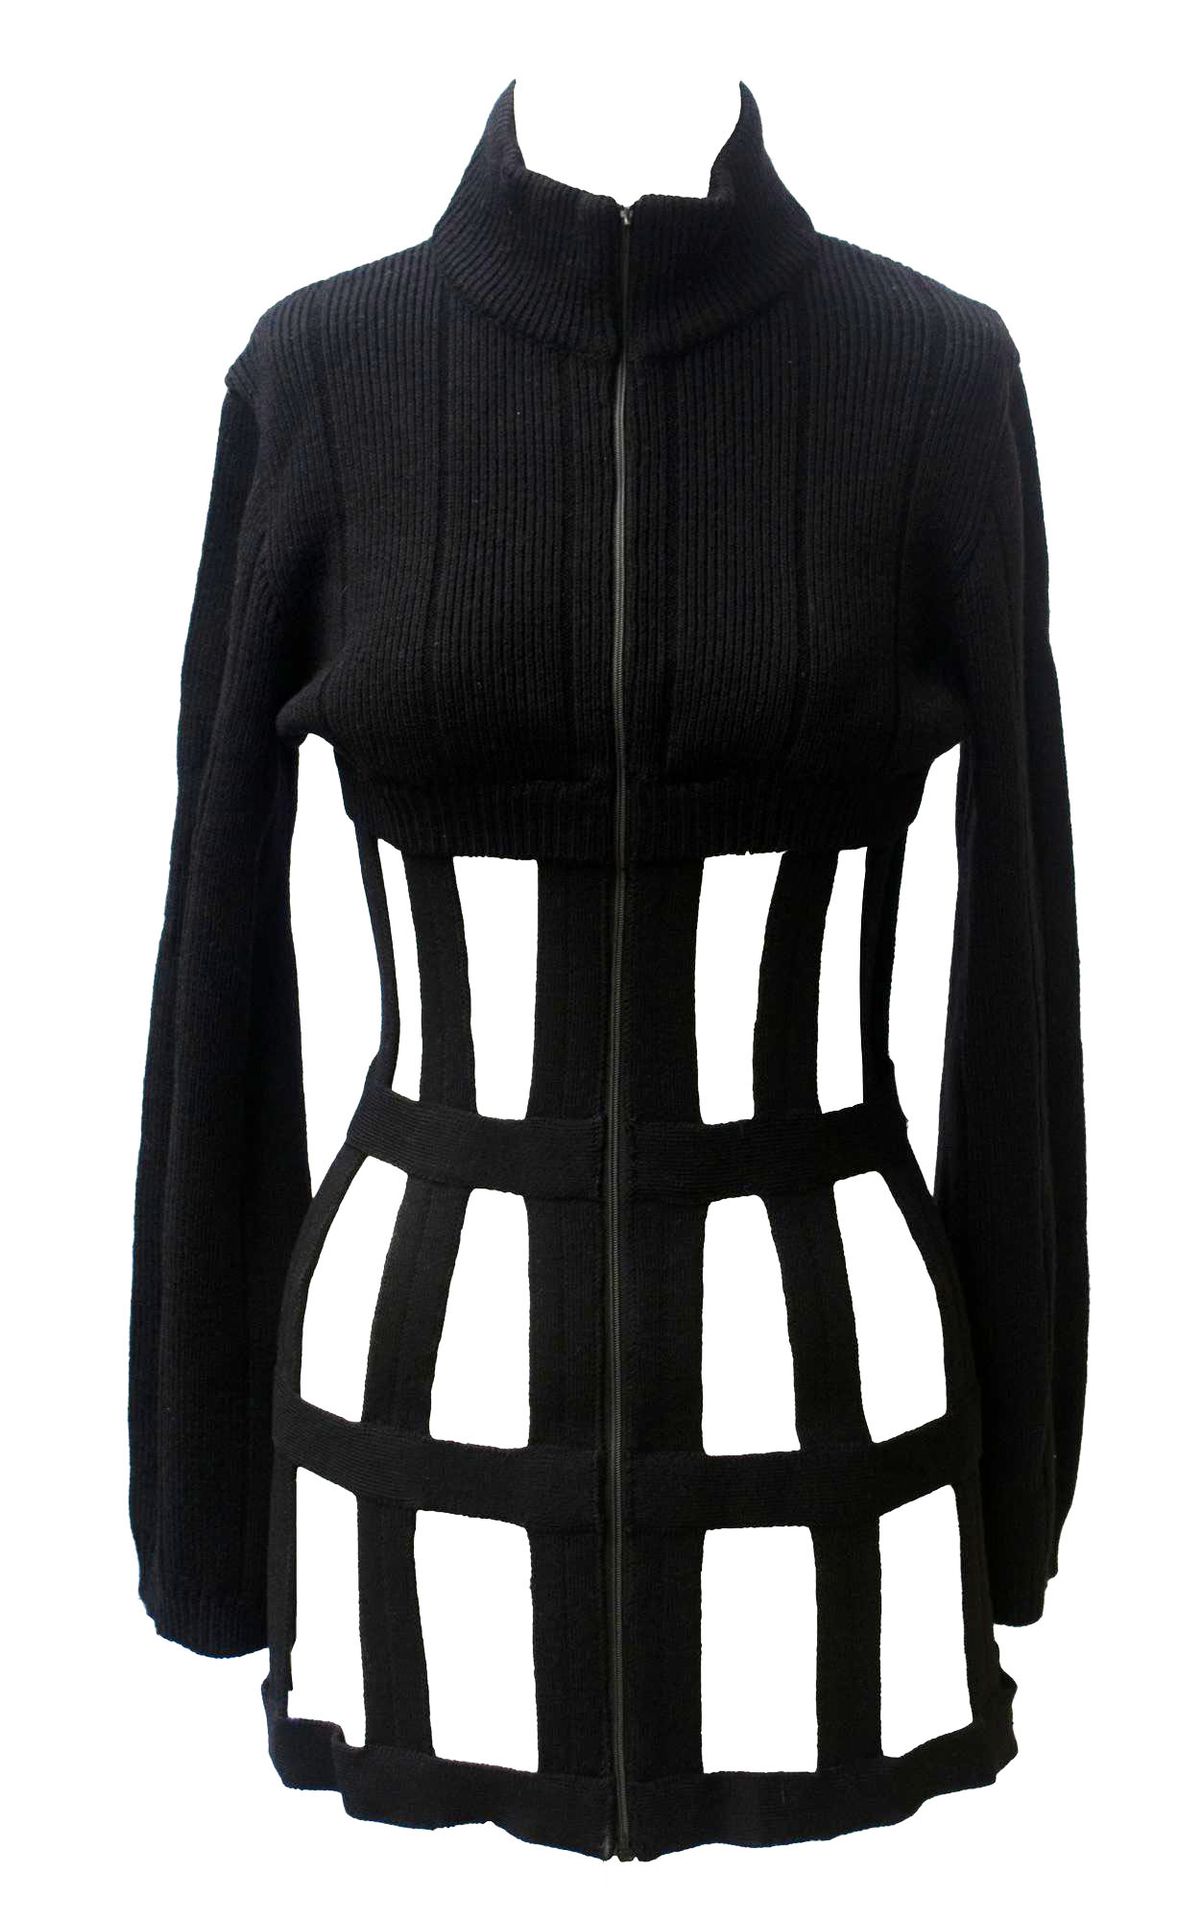 Null Jean Paul Gaultier

CAGE SWEATER



Description:

Black wool for this sweat&hellip;